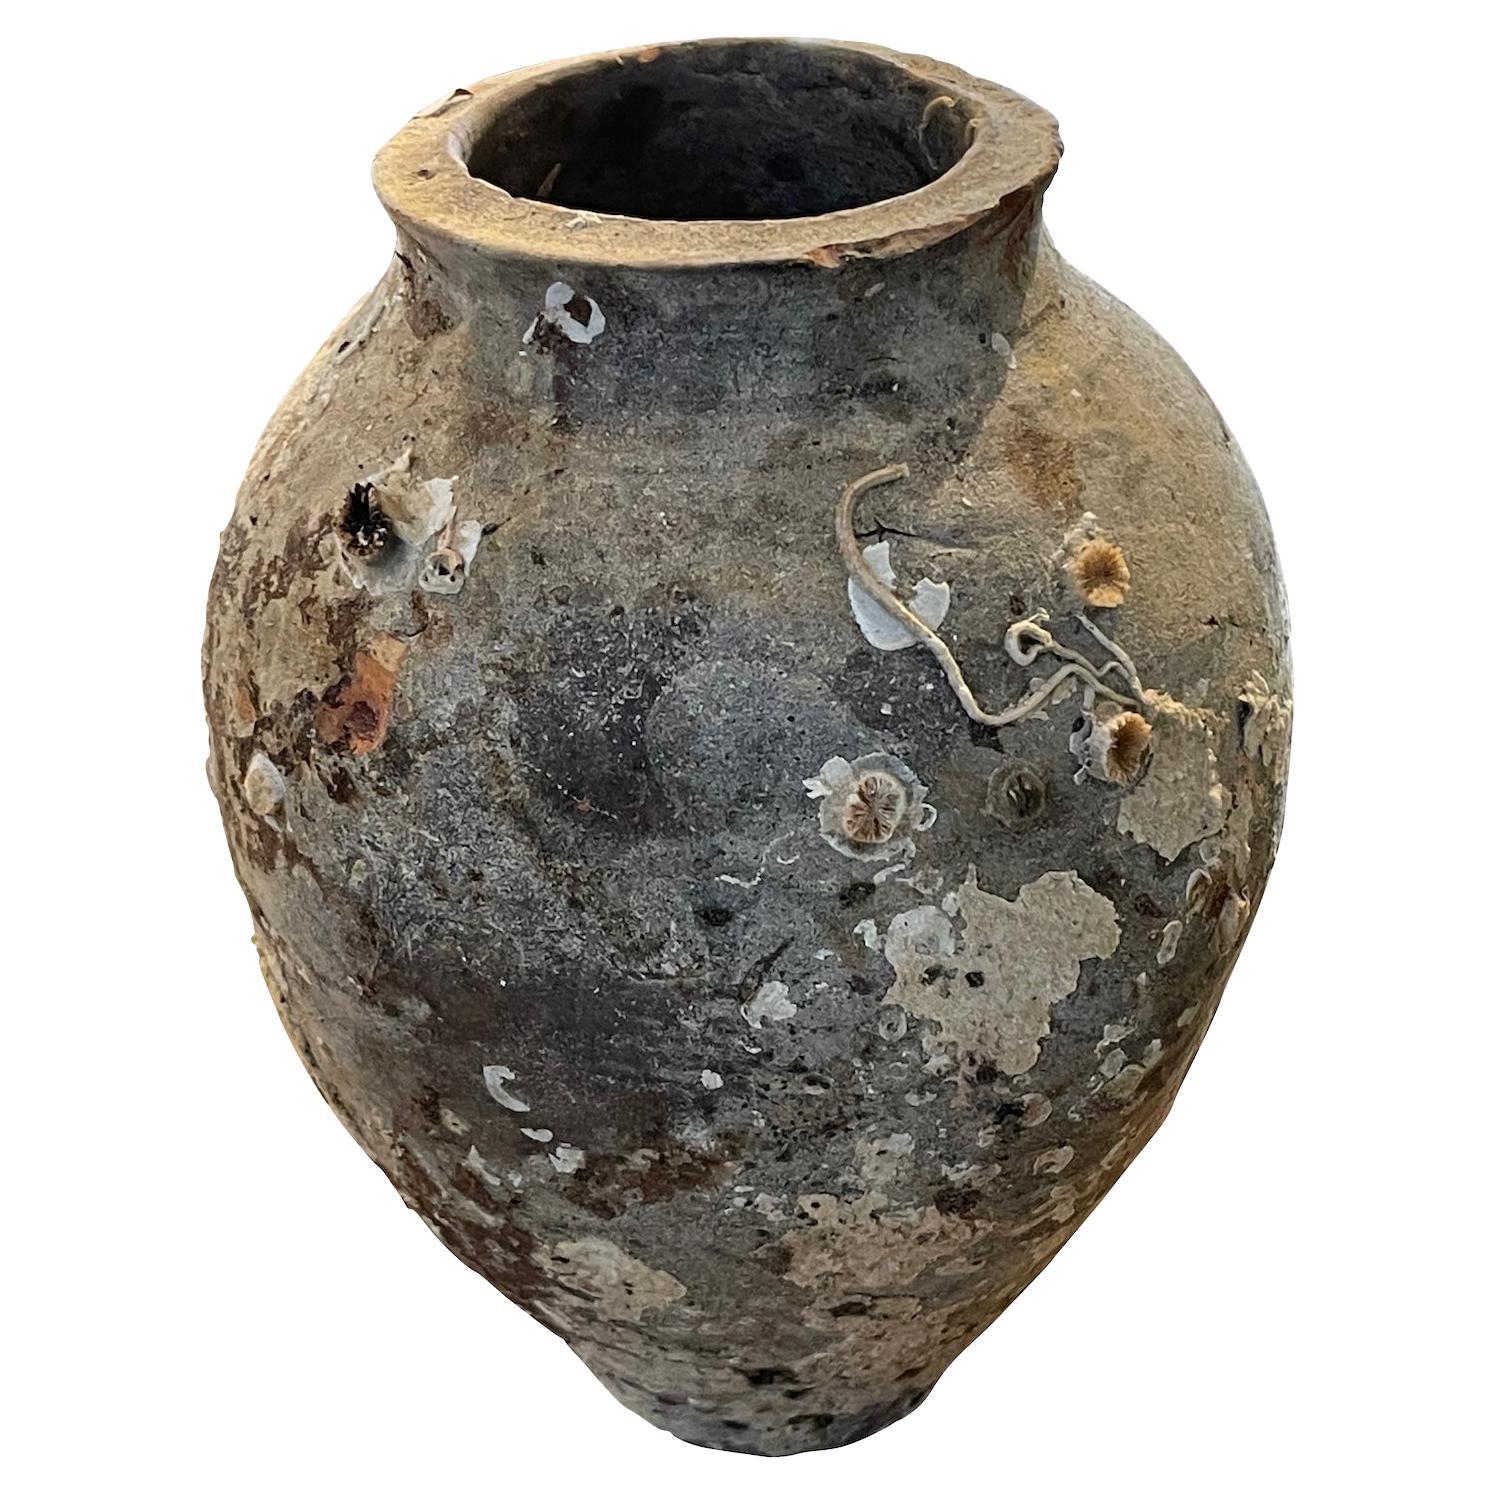 13th century Chinese Song dynasty ship wrecked vase.
Museum quality.
Beautiful natural shells and barnacles from being under water
for hundreds of years.
Four similar styles are available and sold individually.